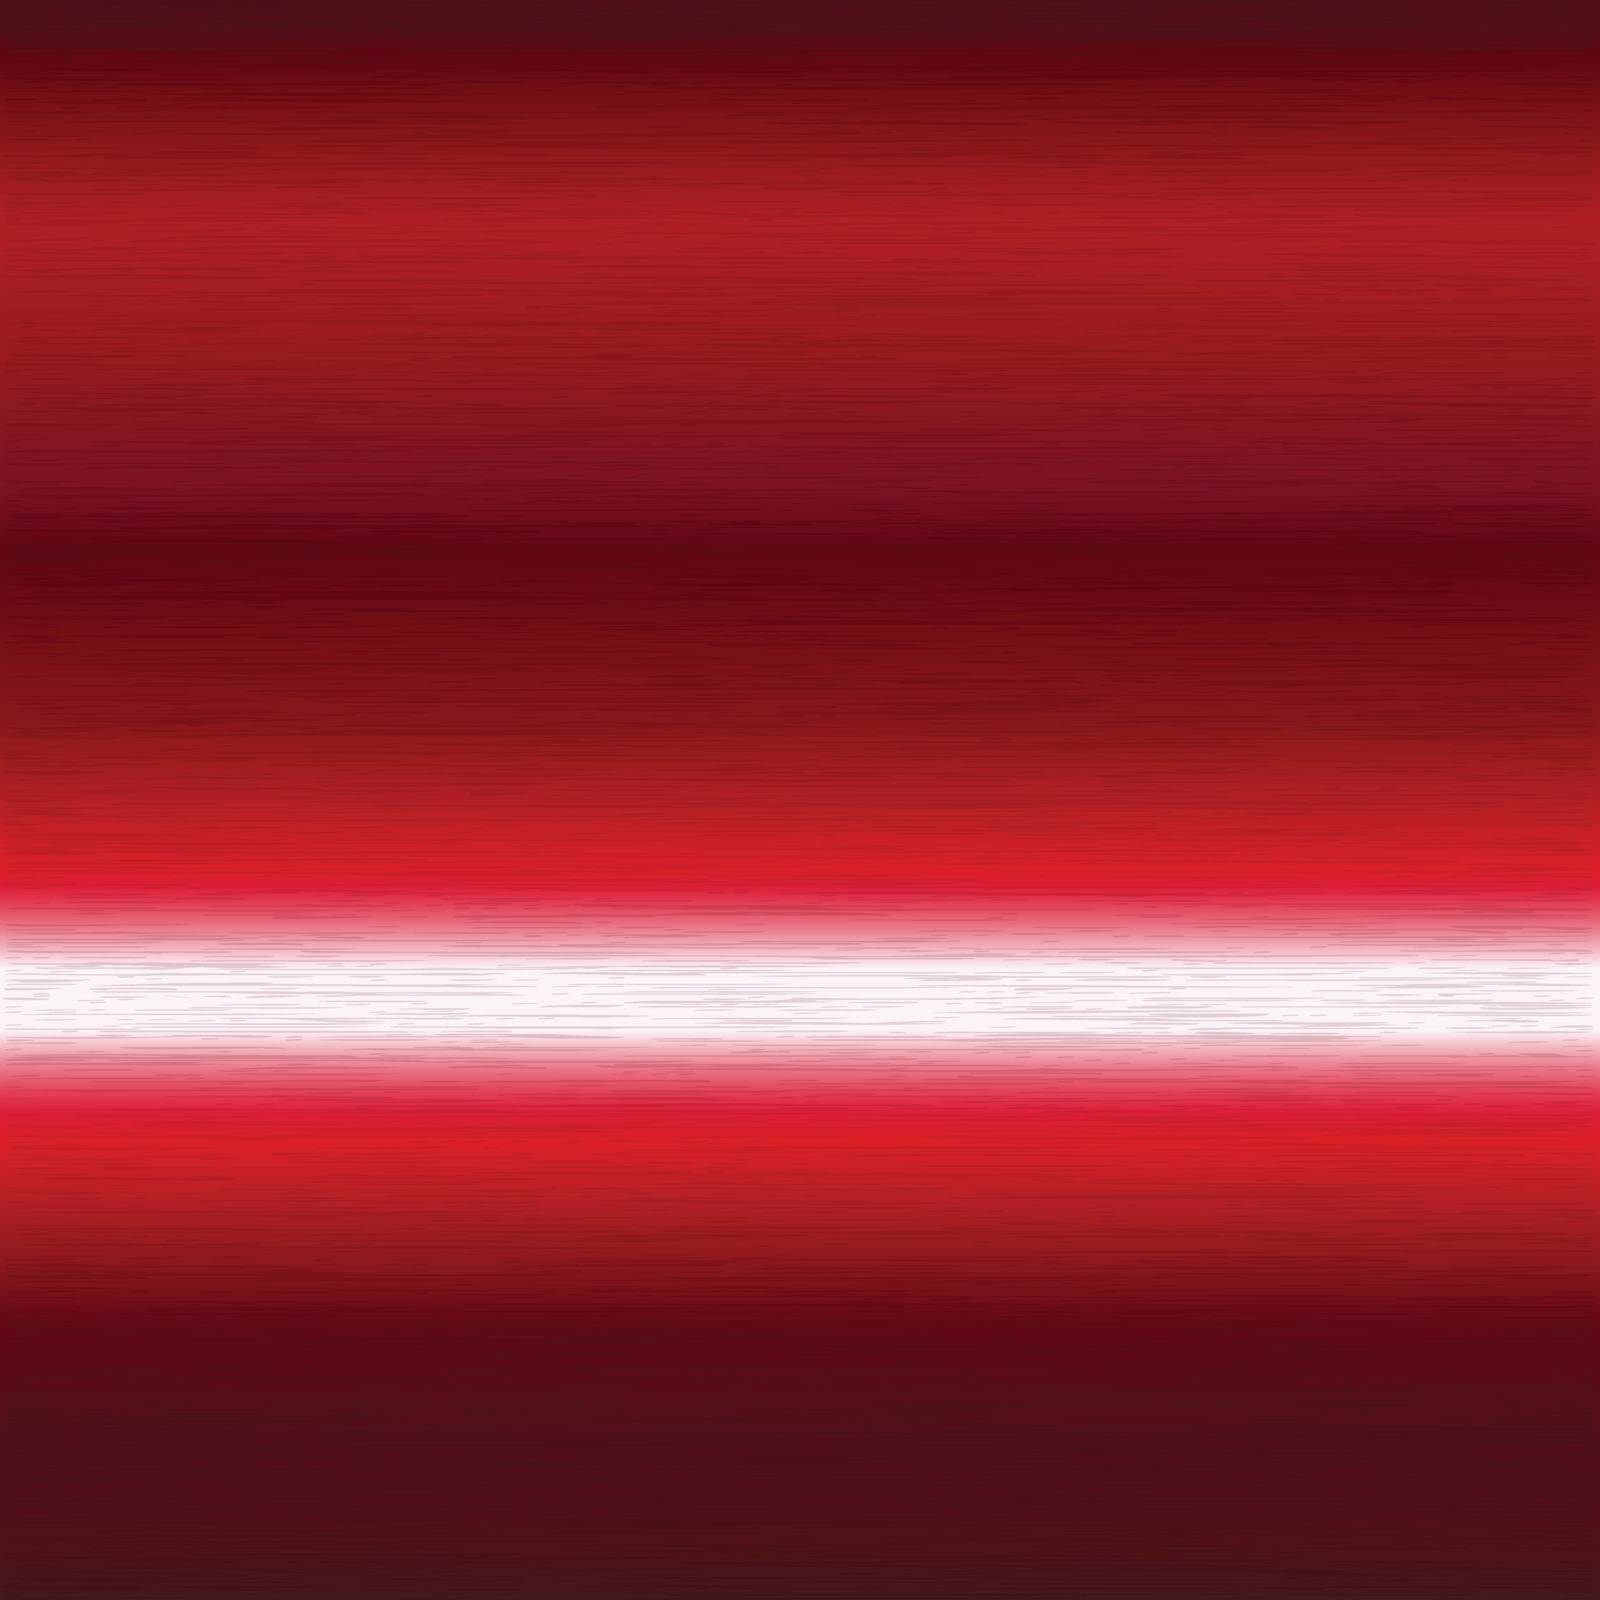 brushed red surface by Istanbul2009